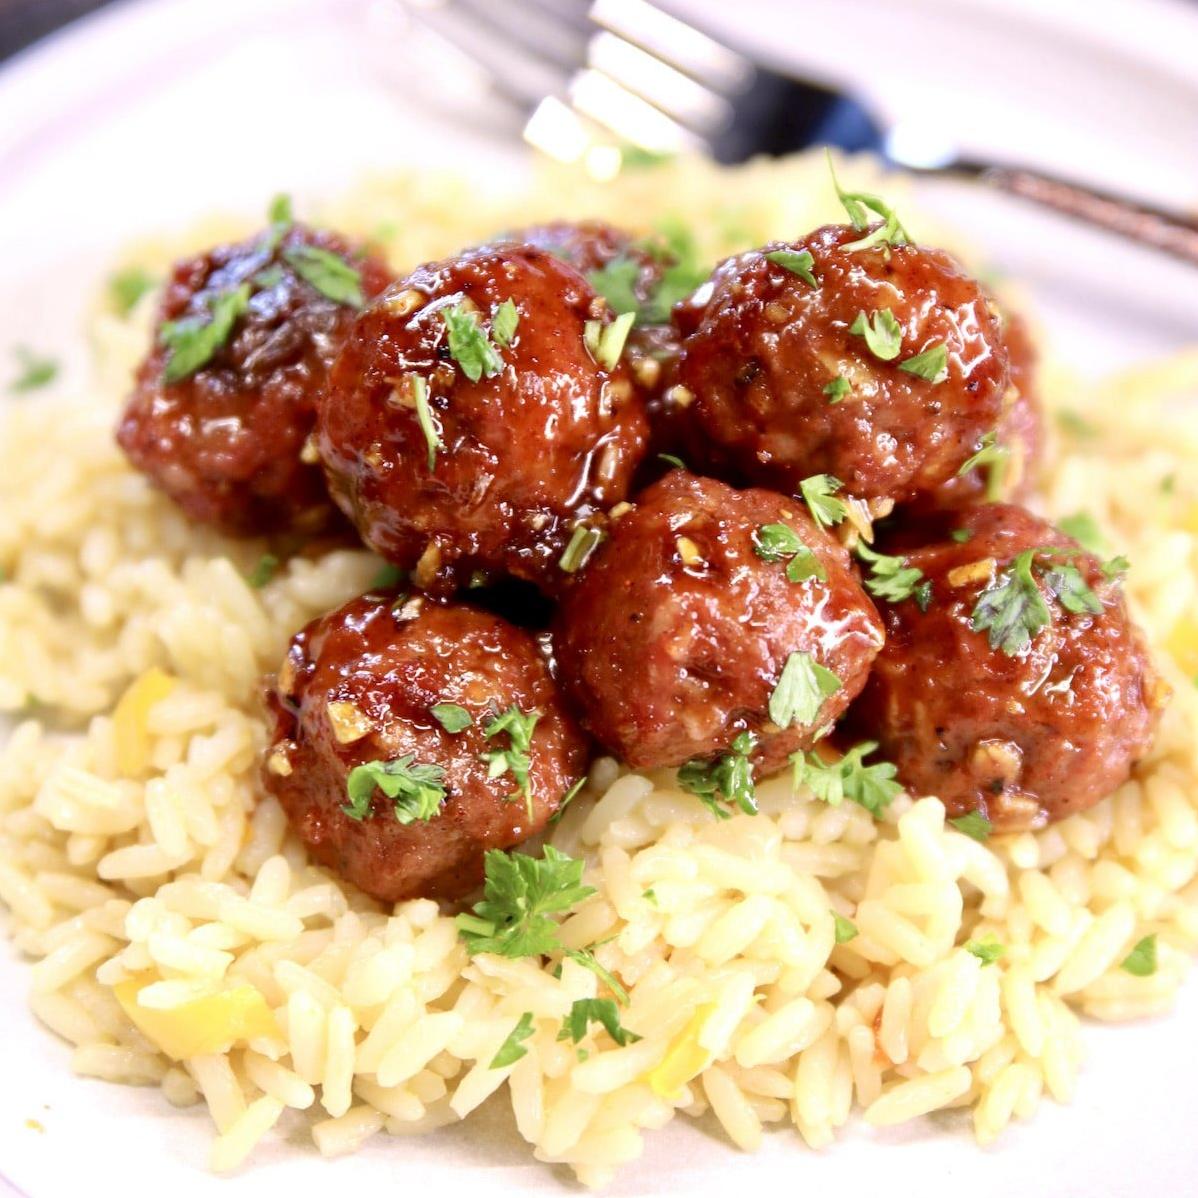  These sweet and savory meatballs are a crowd favorite!